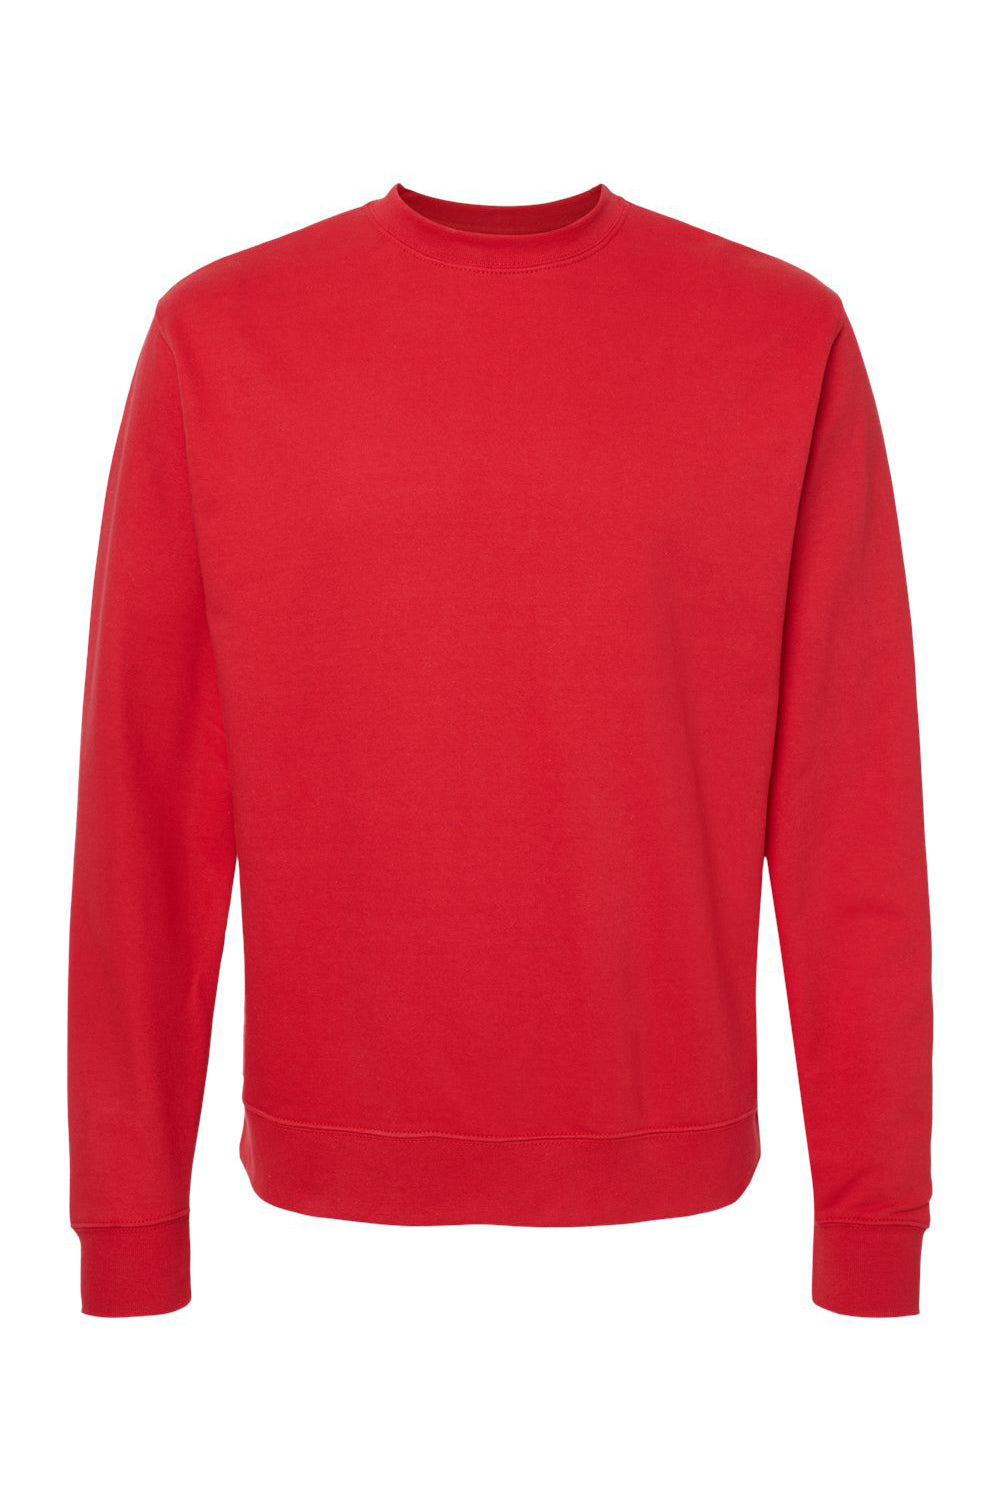 Independent Trading Co. SS3000 Mens Crewneck Sweatshirt Red Flat Front